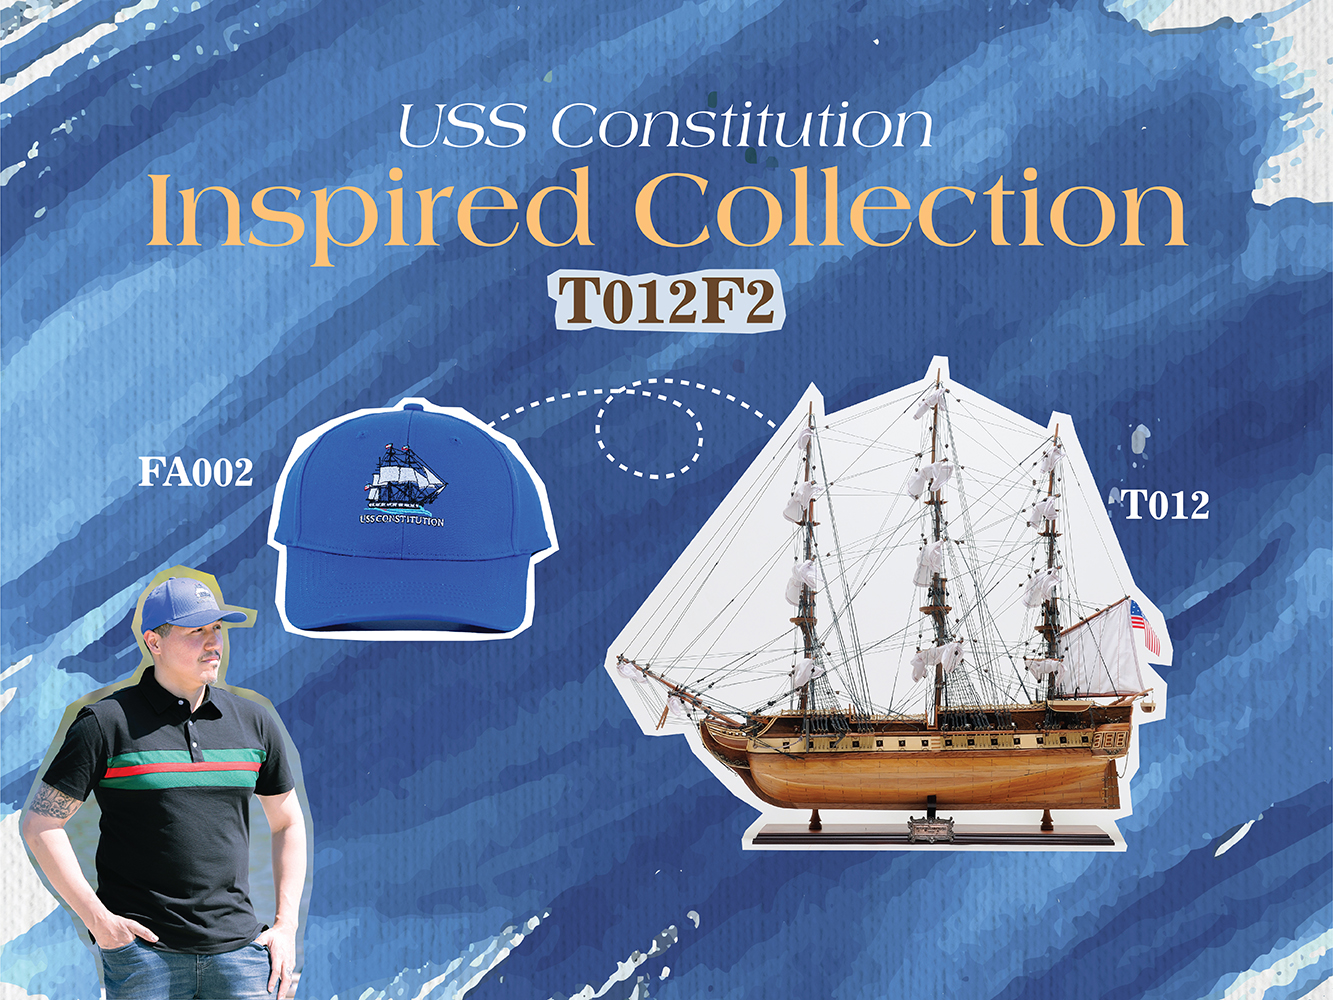 T012F2 Ultimate USS Constitution Combo: A Model Ship and Classic Hat t012f2-ultimate-uss-constitution-combo-a-model-ship-and-classic-hat-l01.jpg